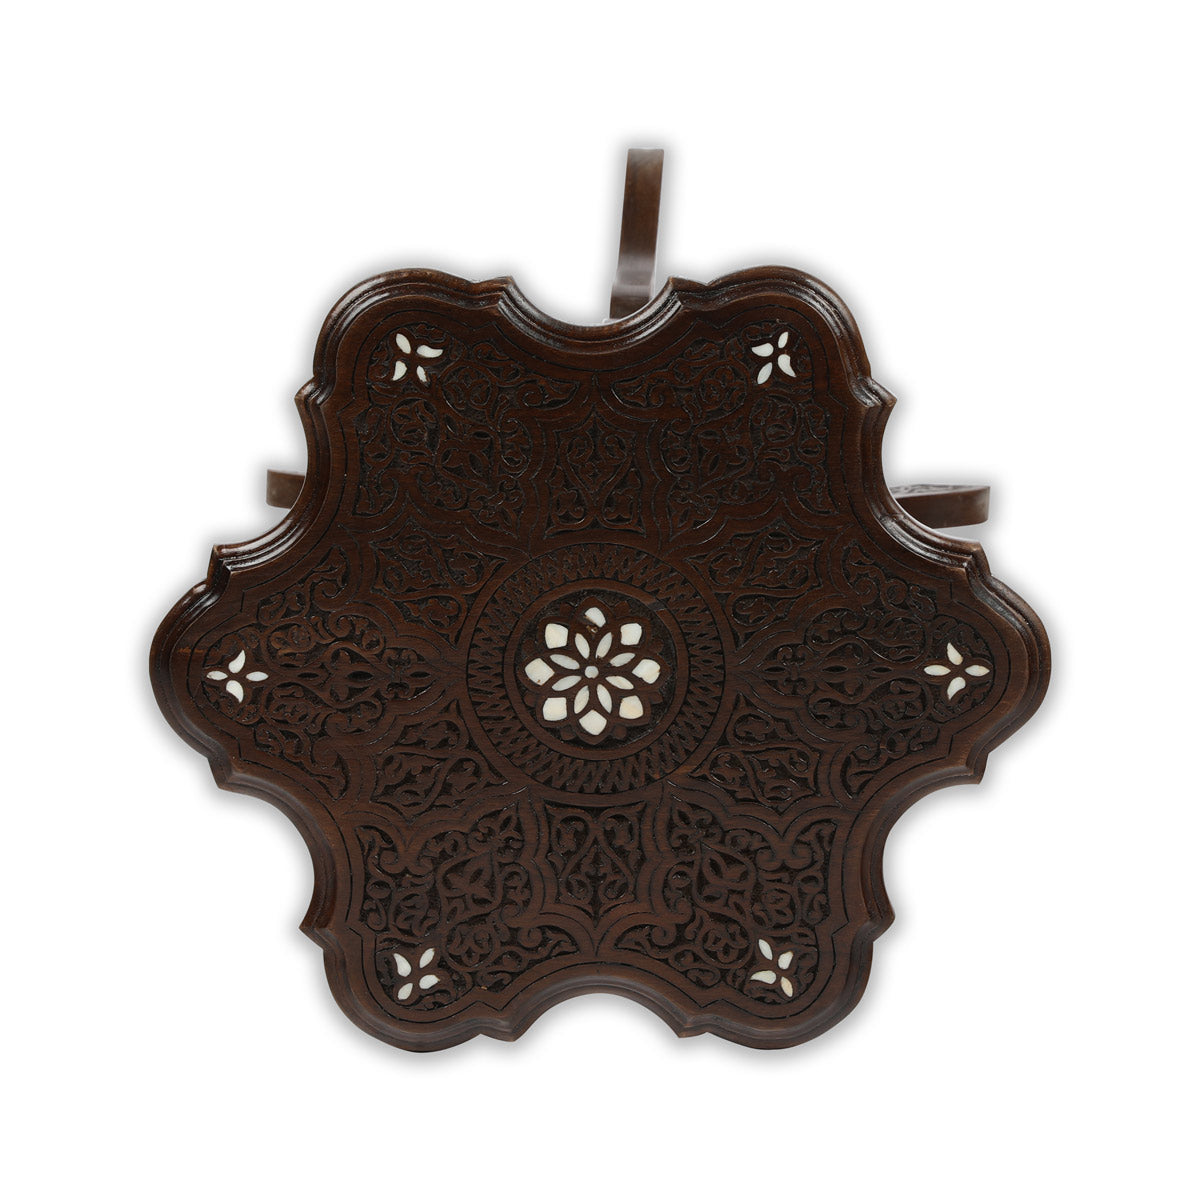 Top View of Floral Shaped Mother of Peal Inlaid Side Table